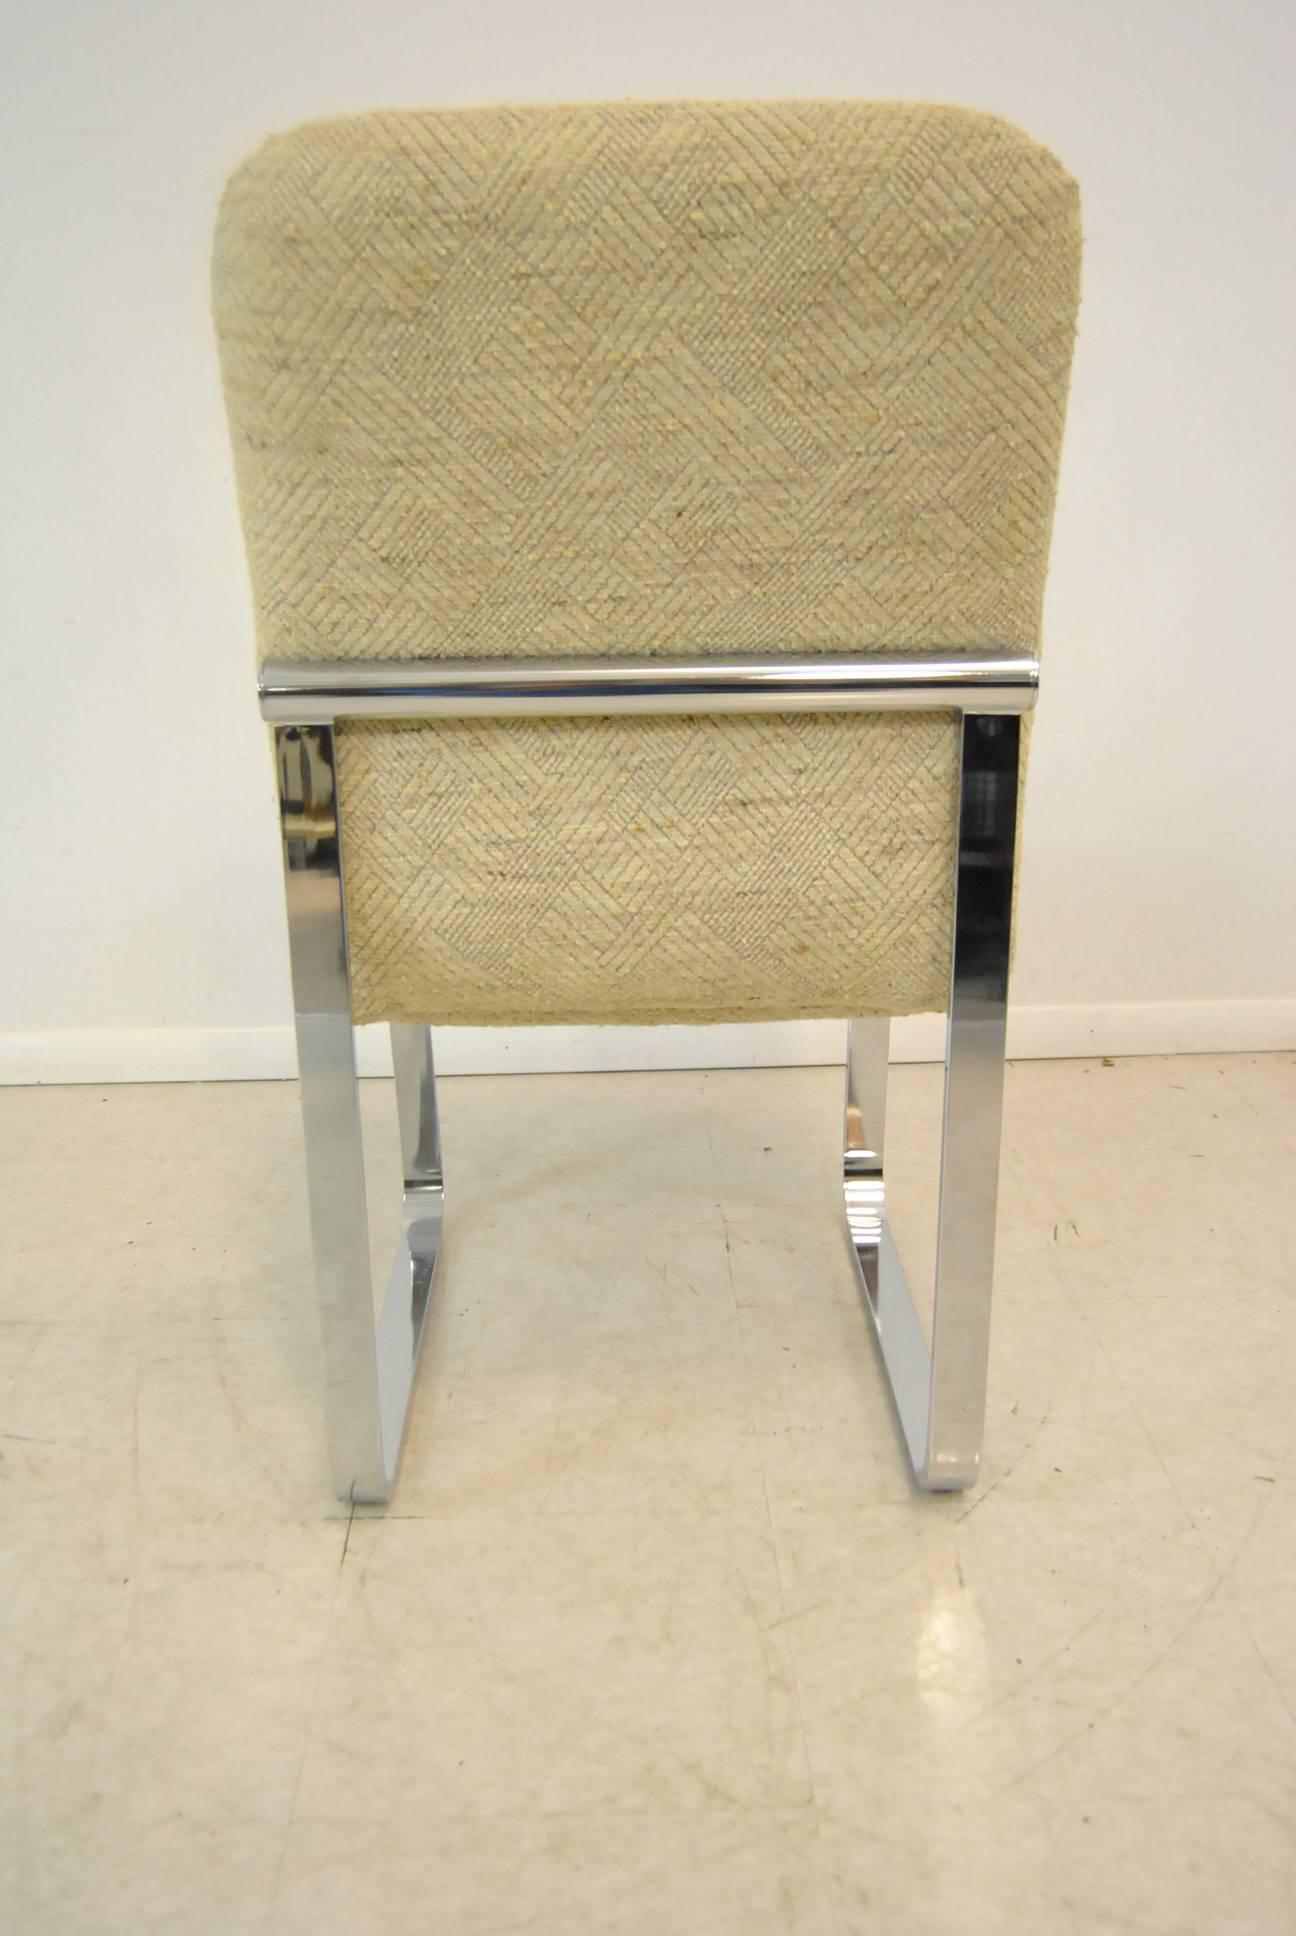 upholstered dining chairs